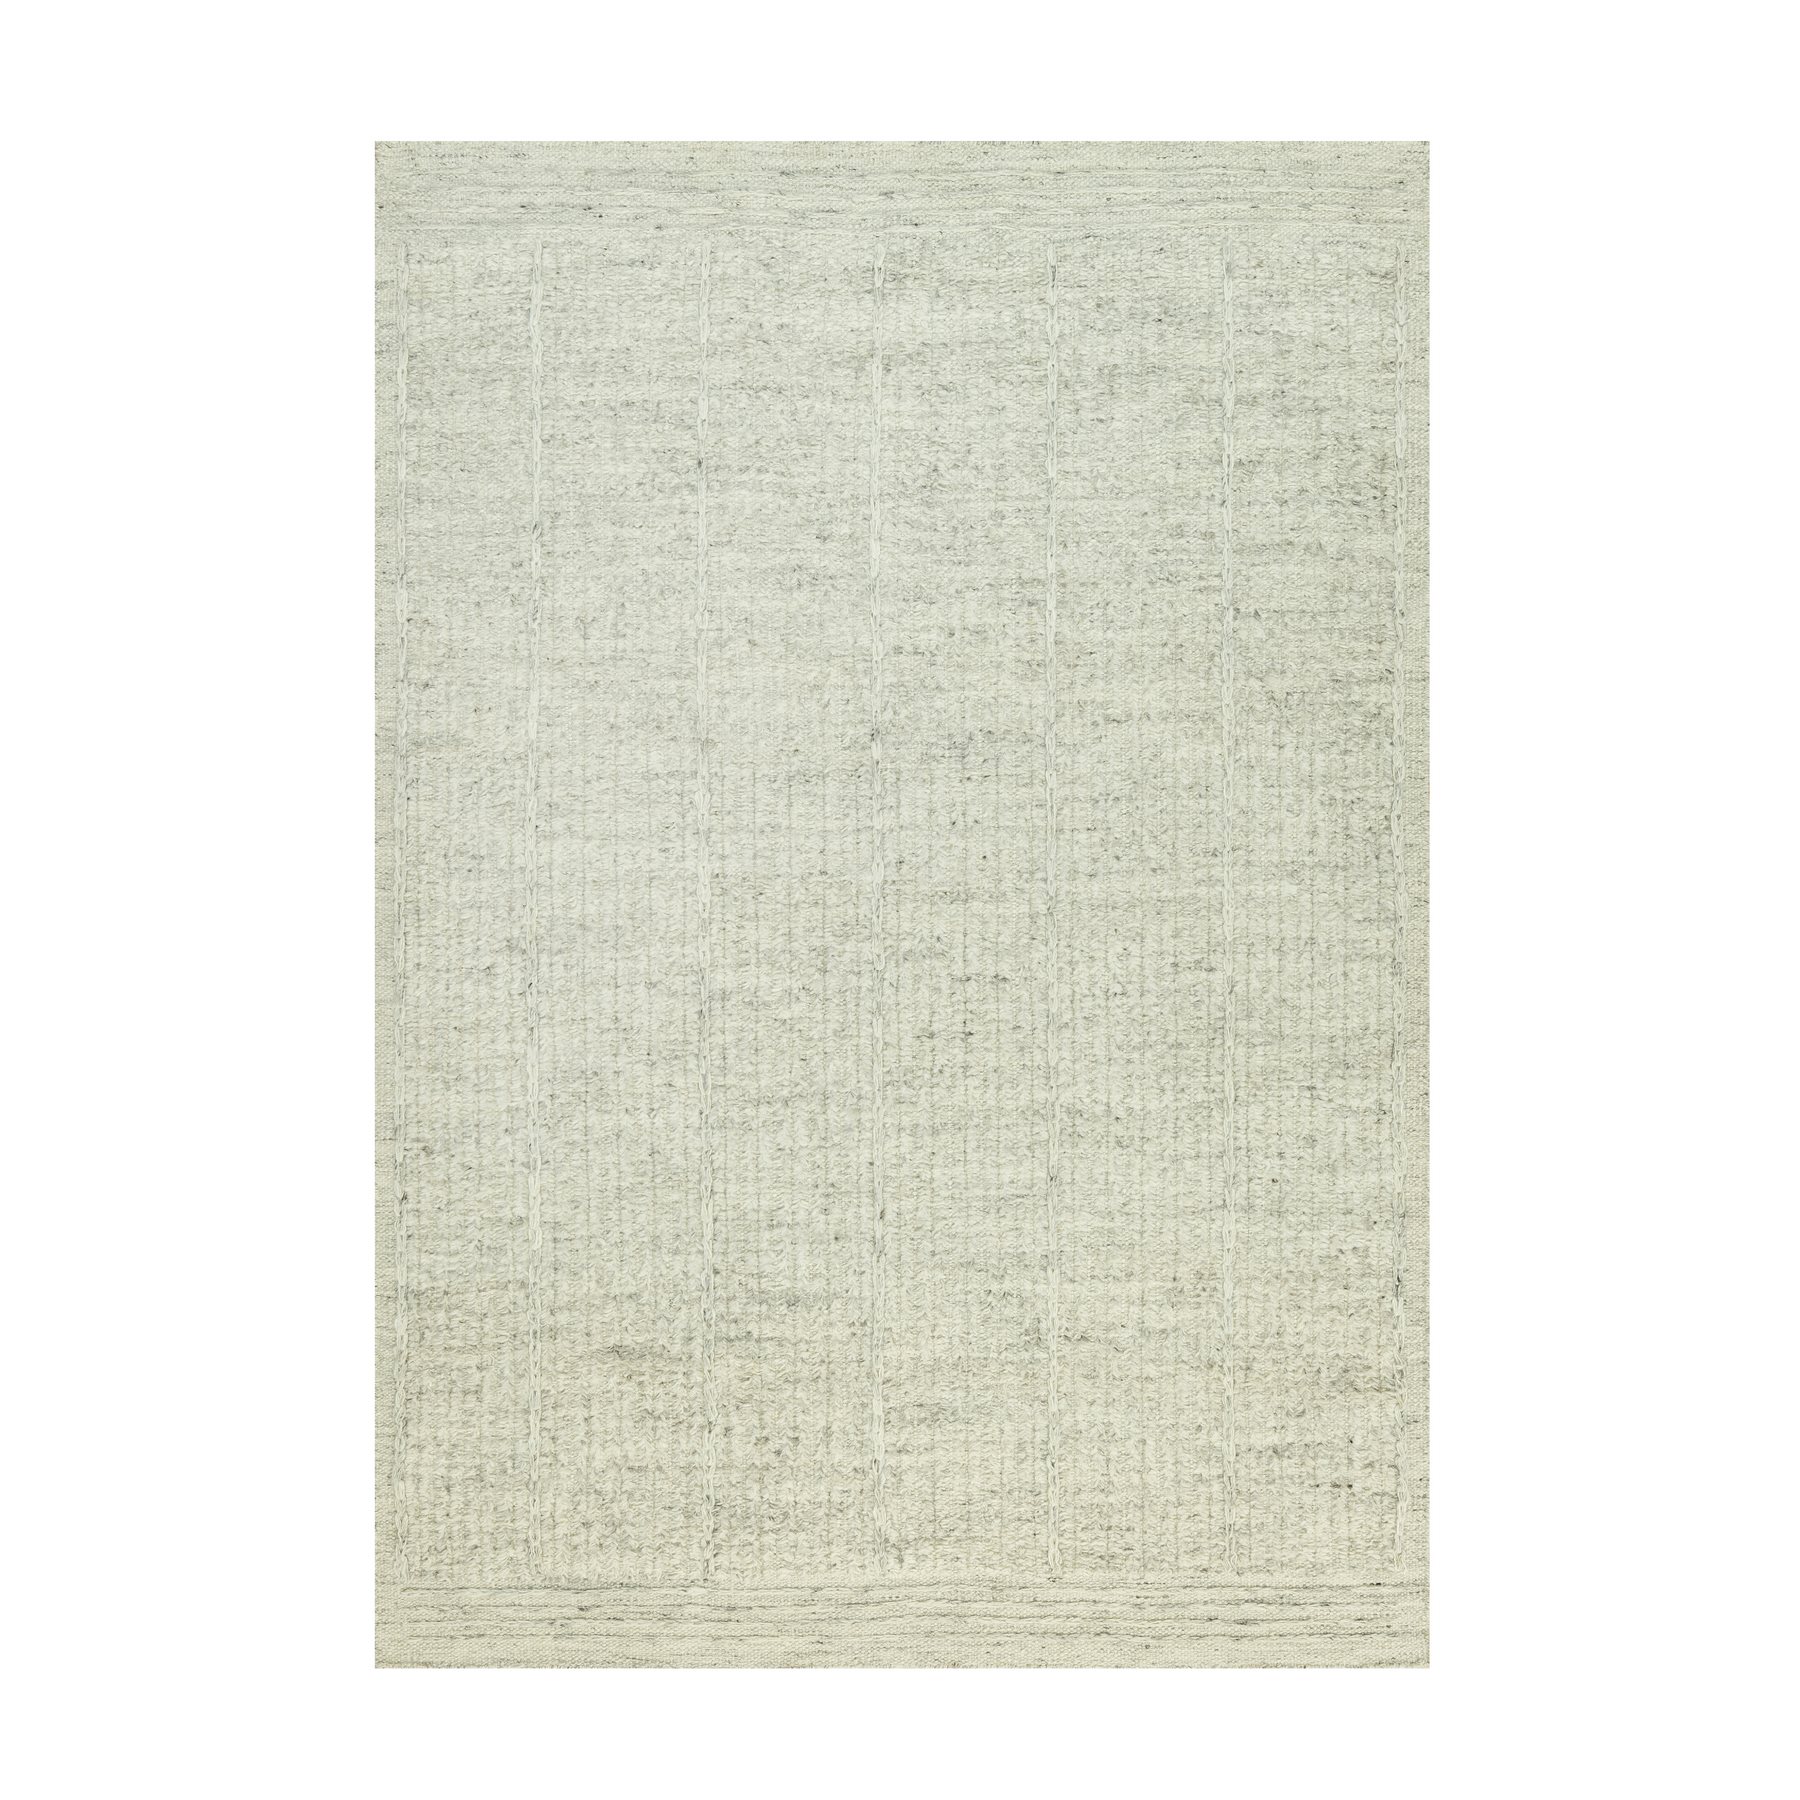 traditional Wool Hand-Woven Area Rug 6'2